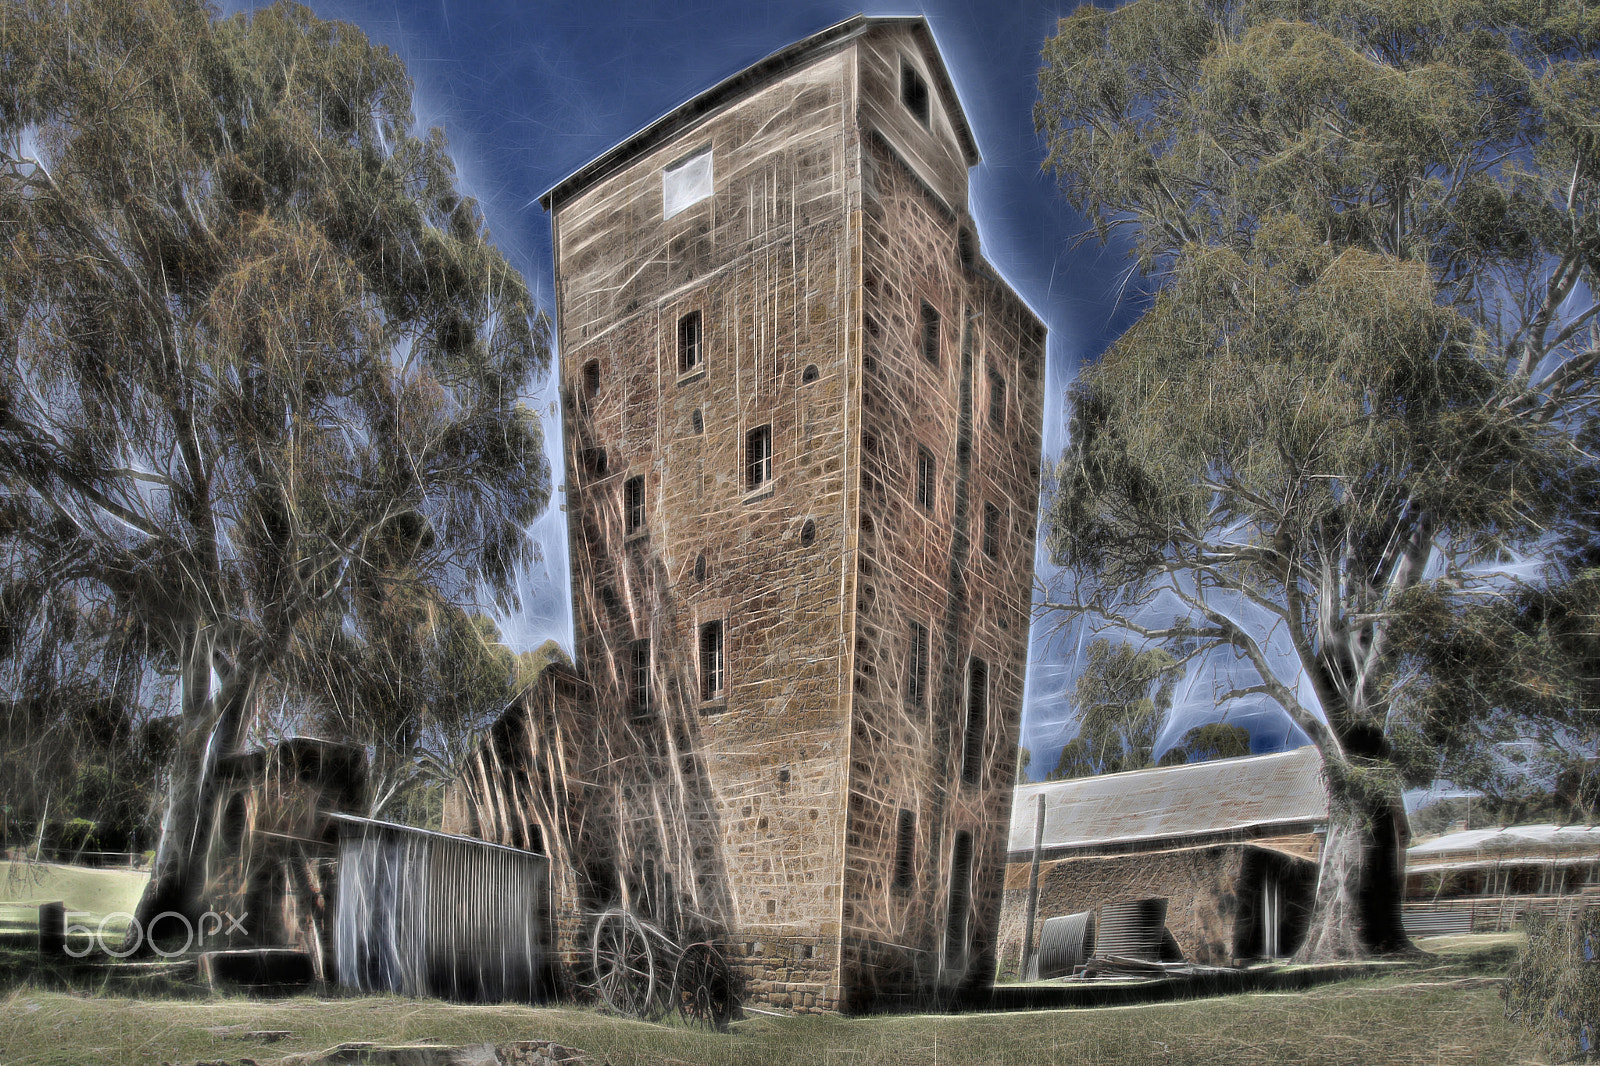 Canon EOS 6D + Sigma 24-105mm f/4 DG OS HSM | A sample photo. Jacka's brewery nightmare 2 photography